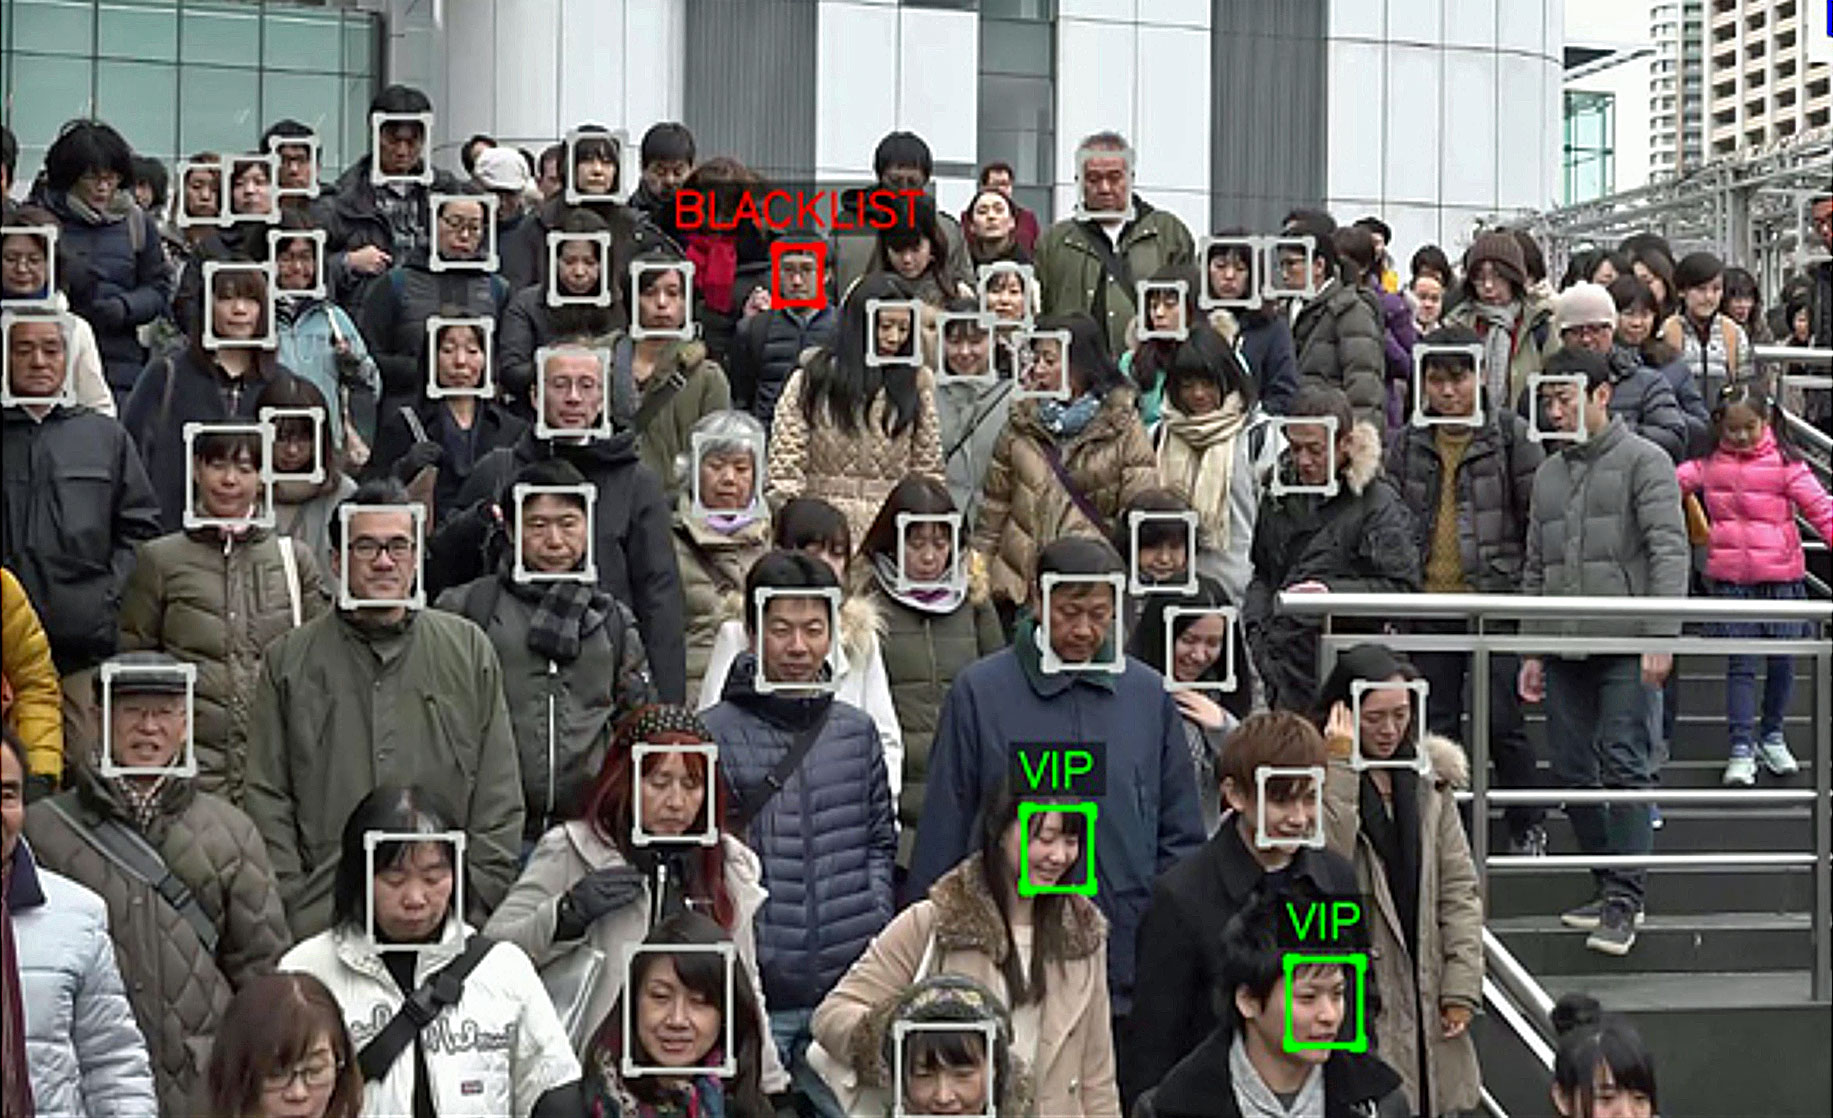 NEC's Video Face Recognition Technology